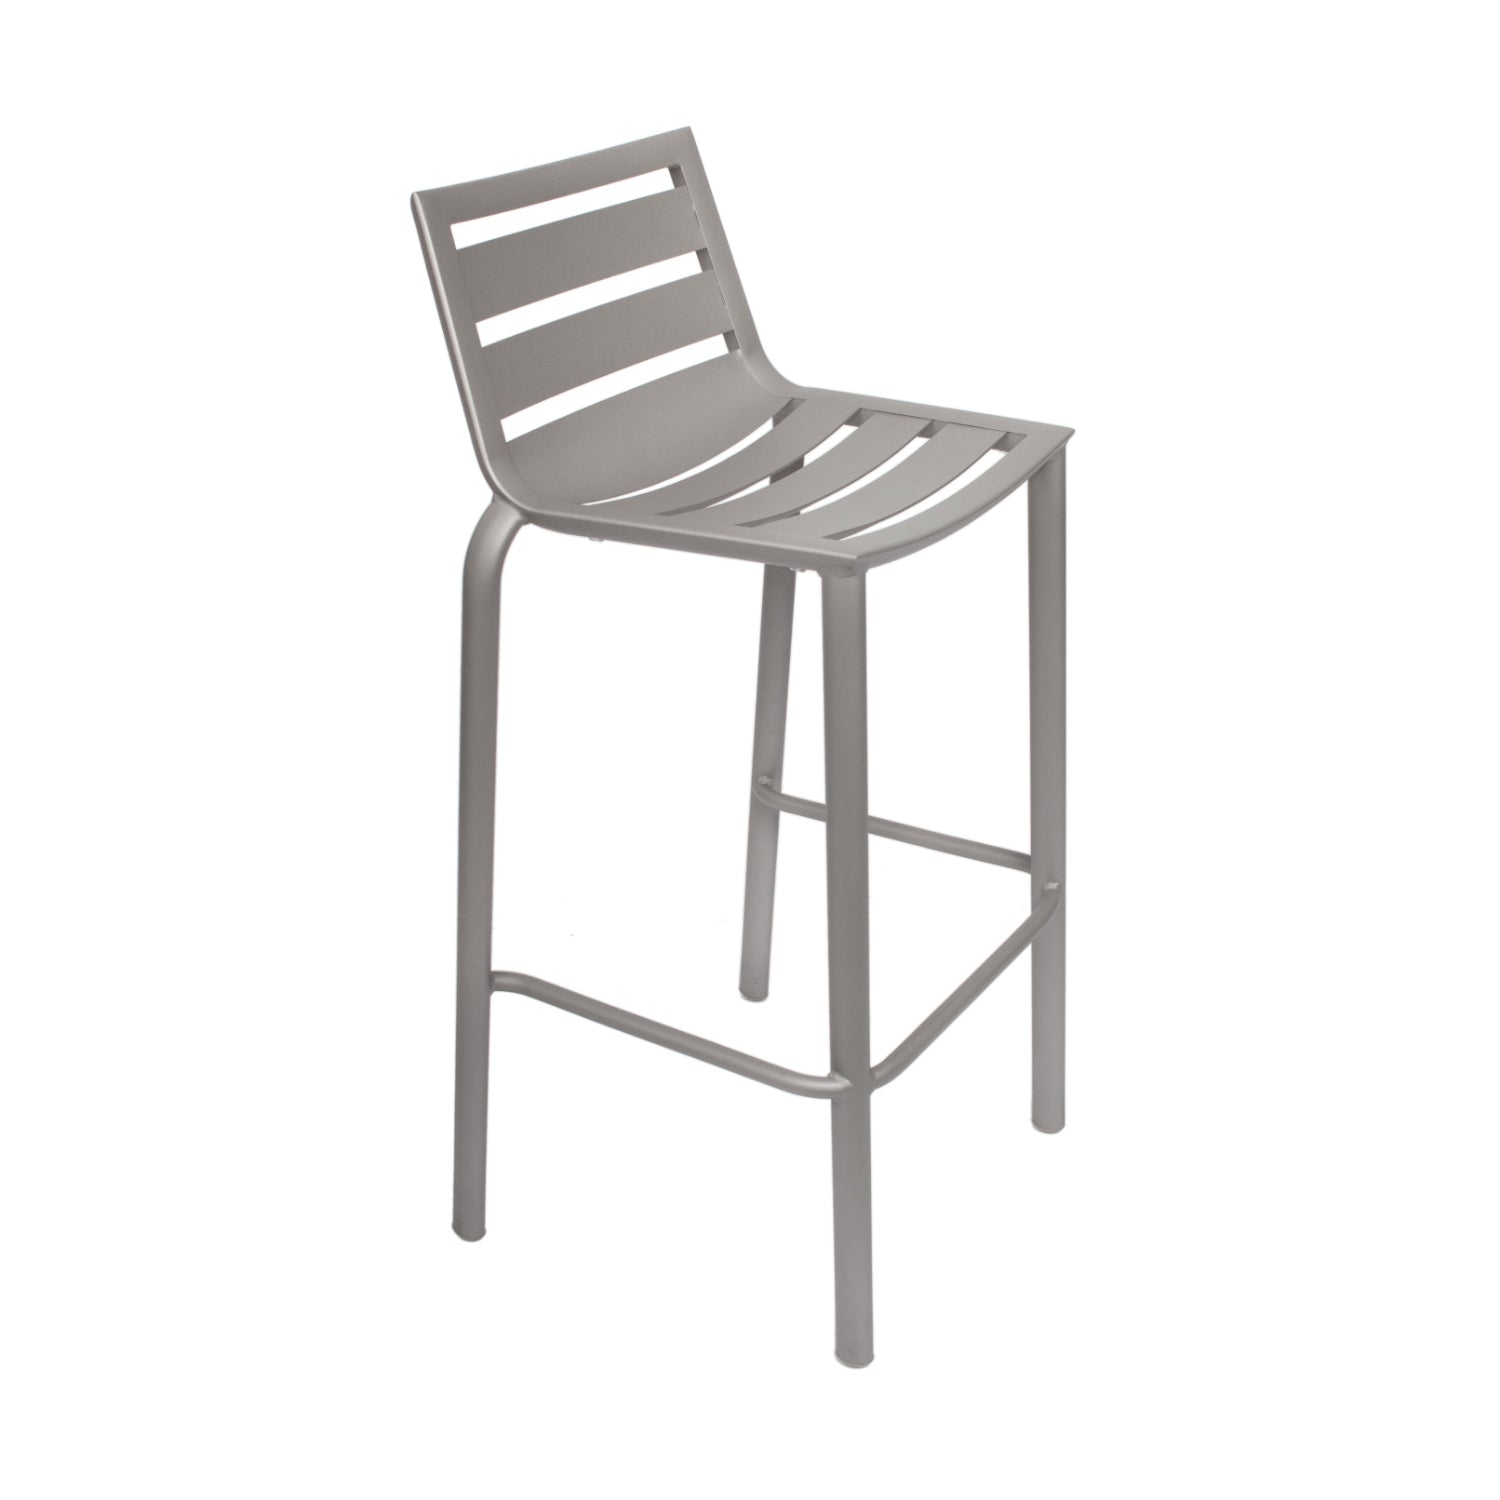 South Beach Collection Outdoor/Indoor Stacking Titanium Silver Aluminum Barstool